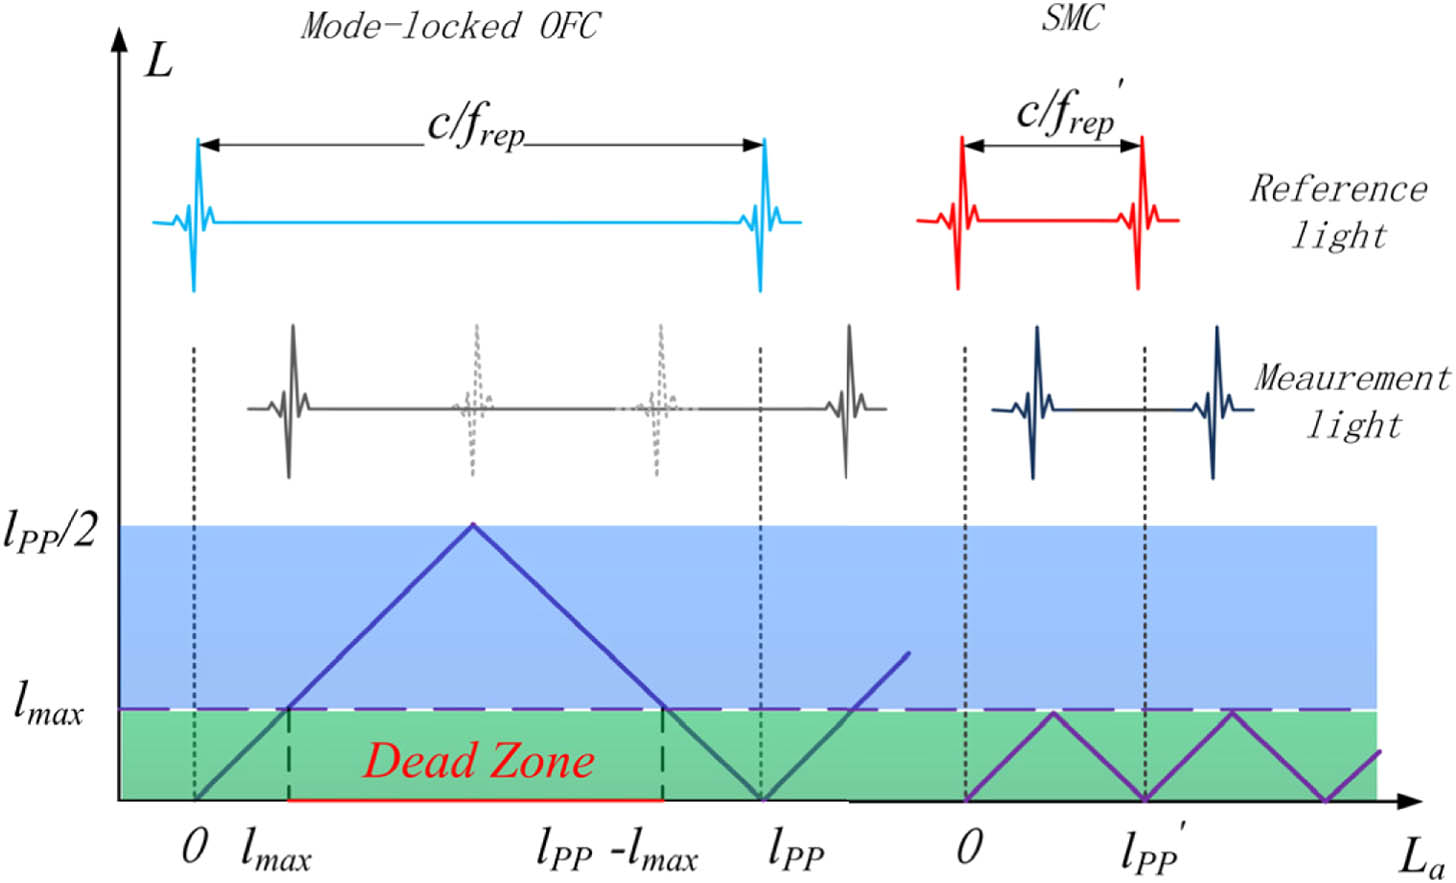 Comparison of dead zone of mode-locked OFC and SMC. The dead zone is introduced by the mismatch between the repetition rate of the OFC and the resolution of the optical spectrum acquisition system. Using an SMC with a repetition rate higher than 2ngδf, the dead zone will be eliminated. La, actual distance to be measured; L, measured distance of a DPI system.